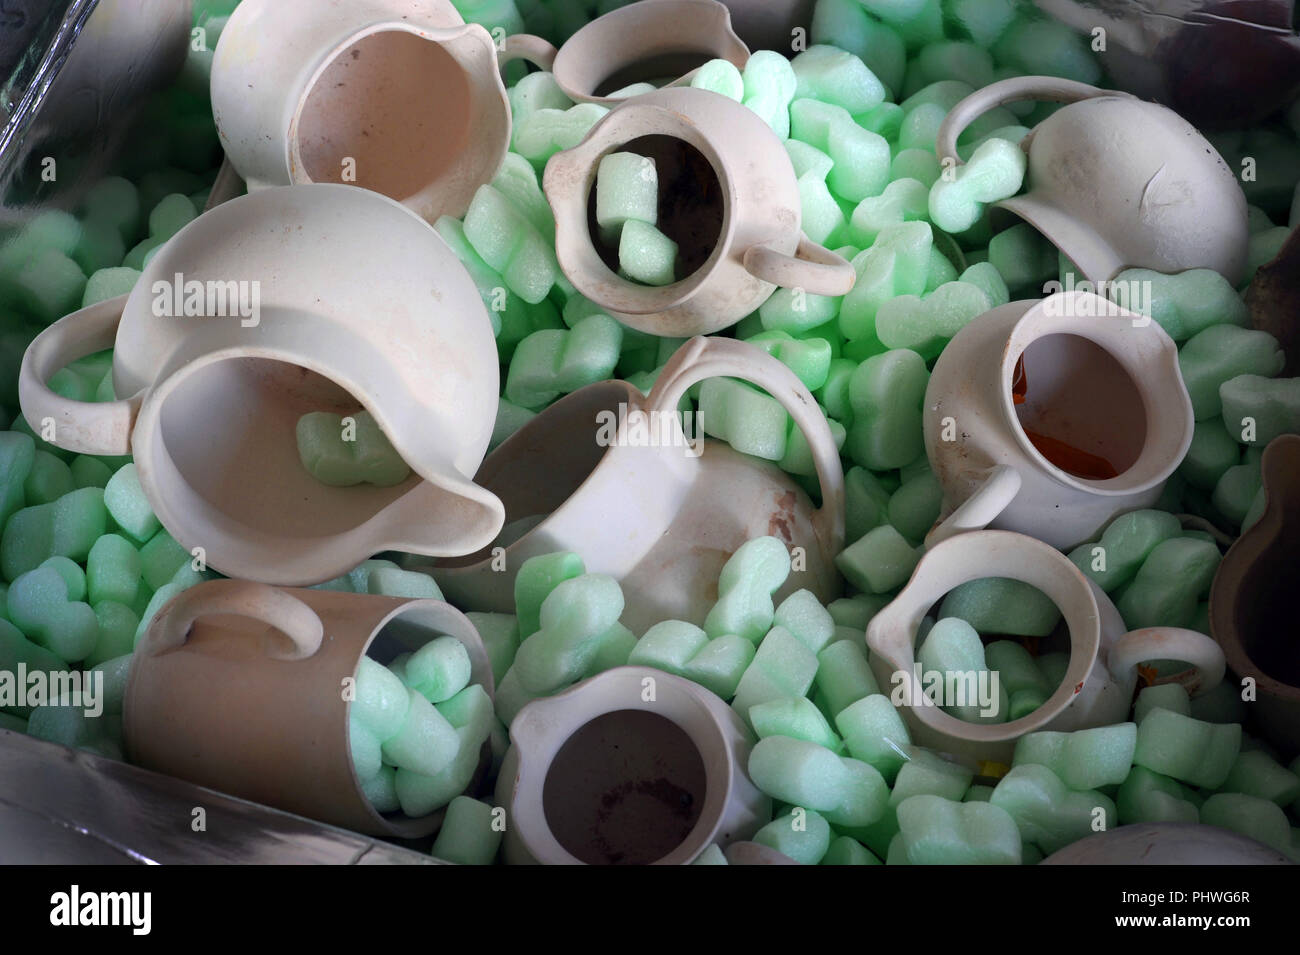 Pale white unglazed pot jugs in a box packed with green polystyrene packing material Stock Photo